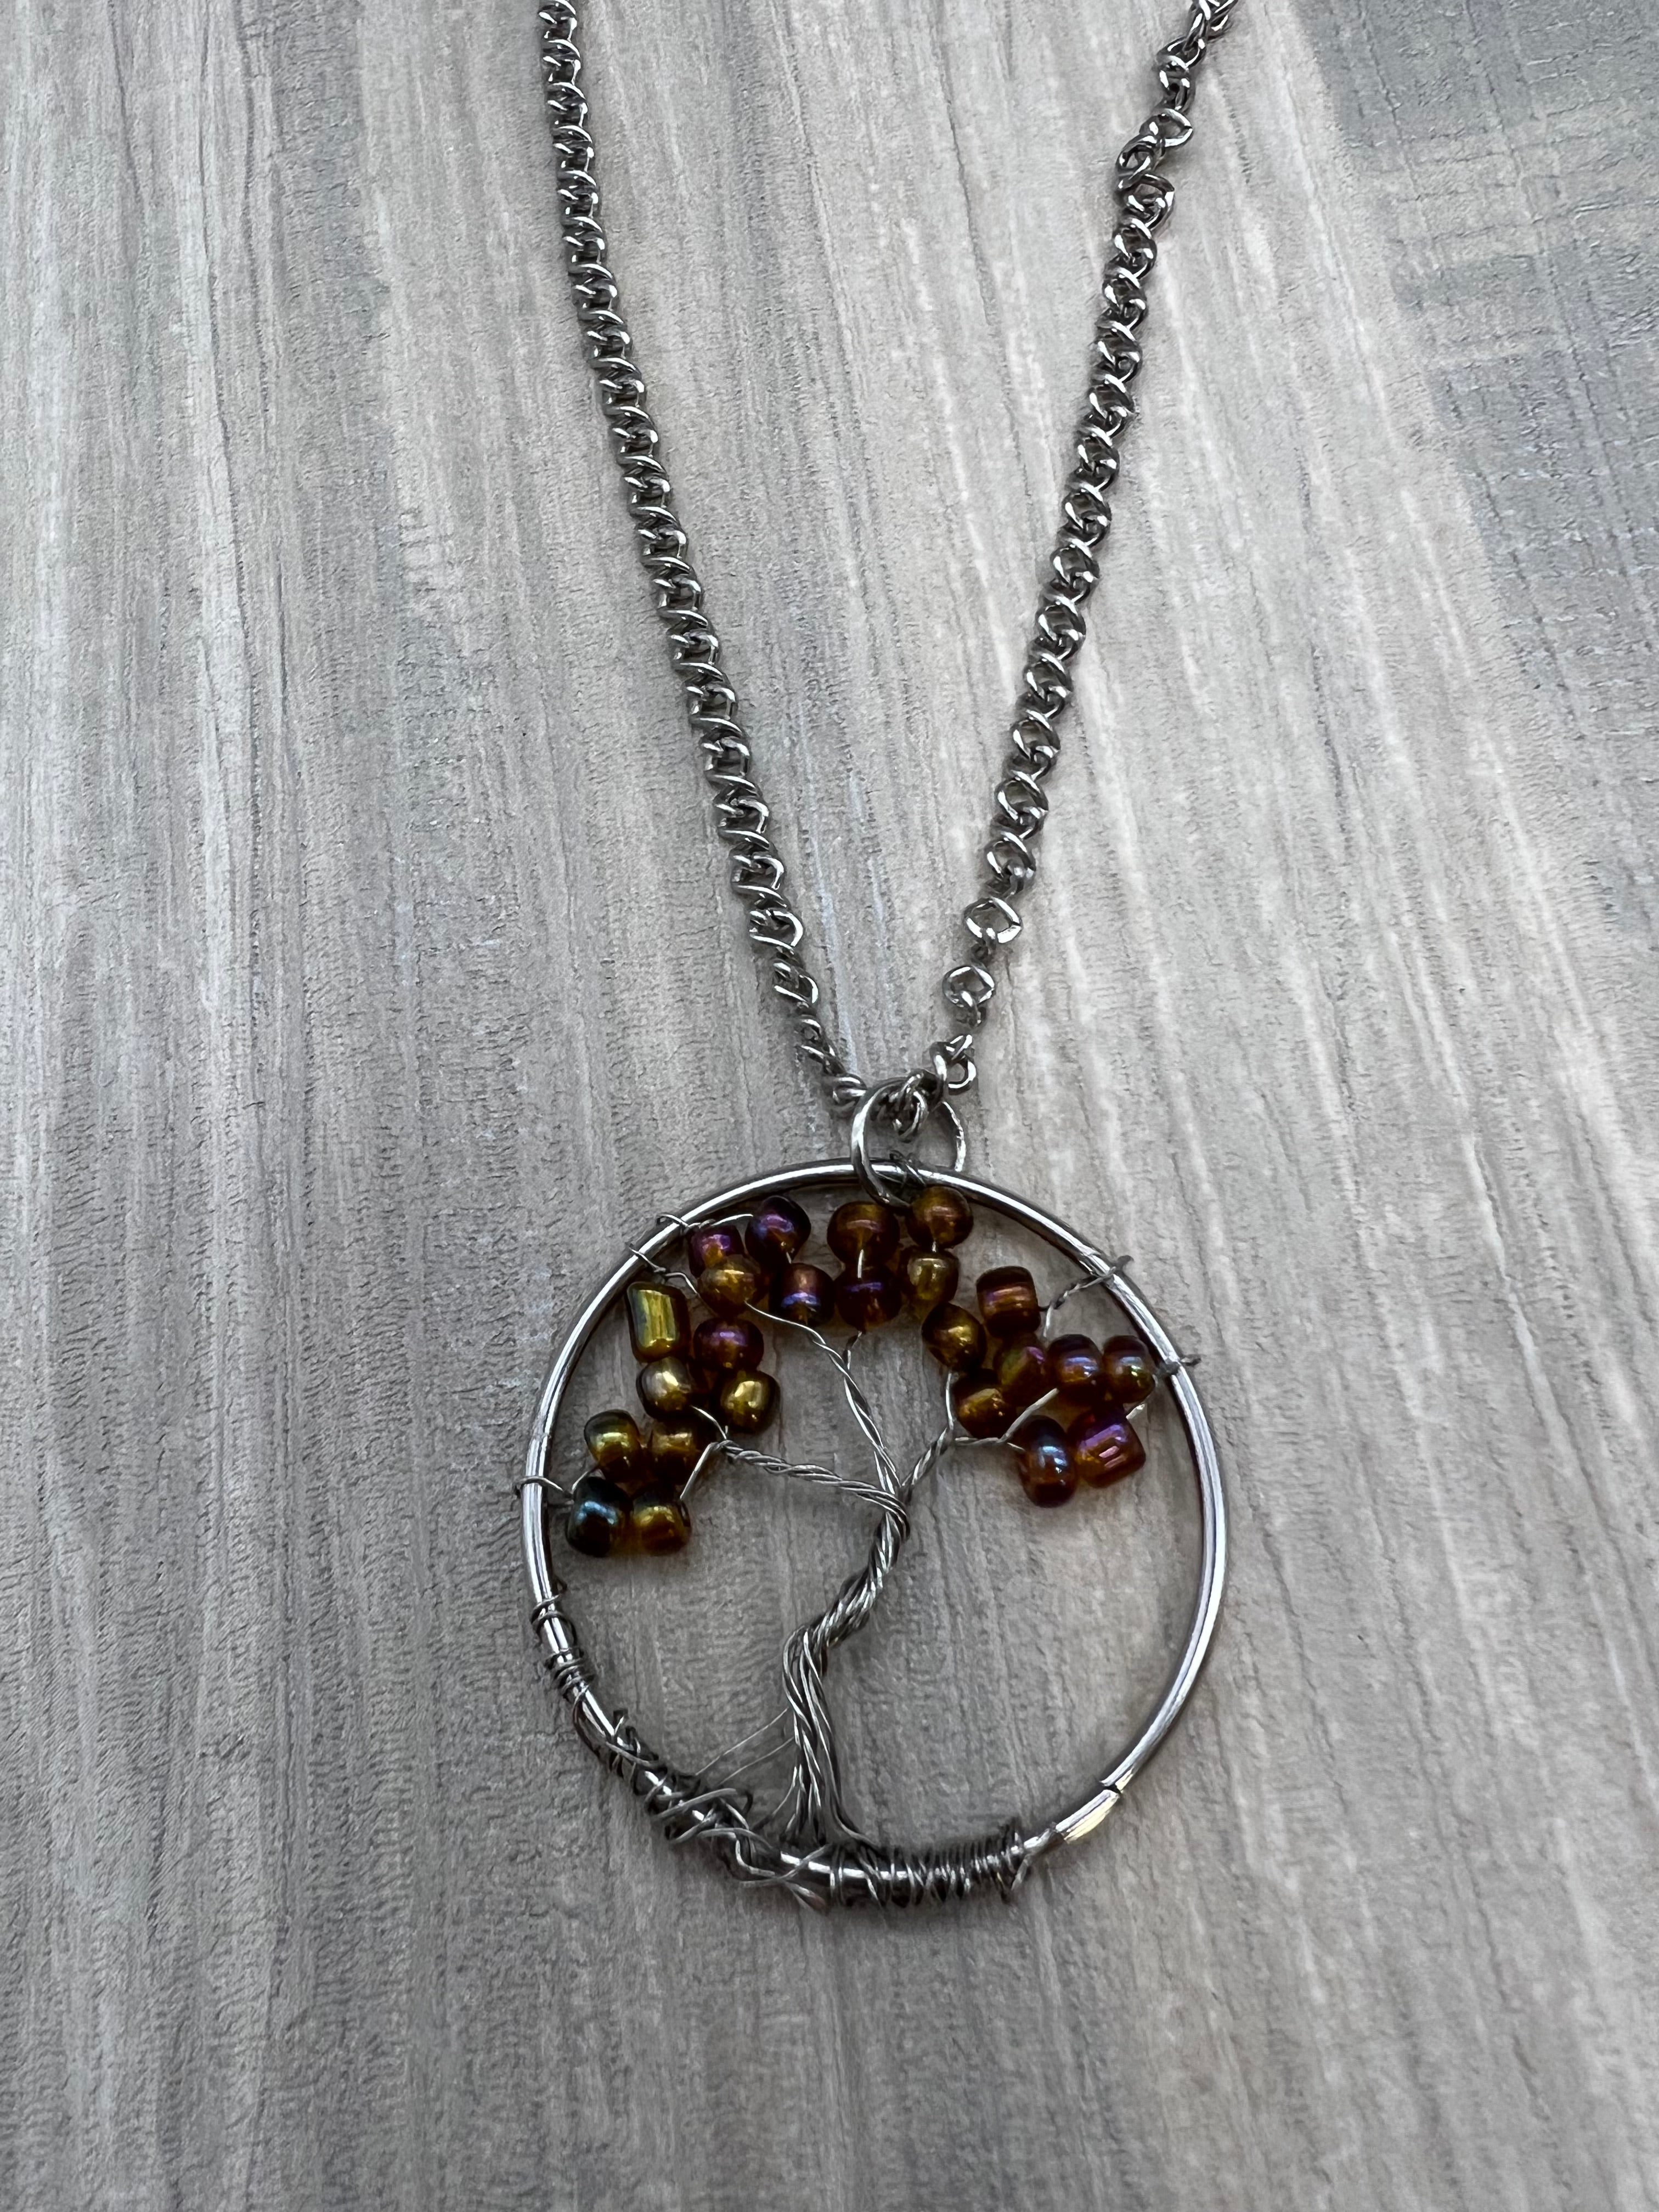 Pat Whitlow - Tree of Life Necklace